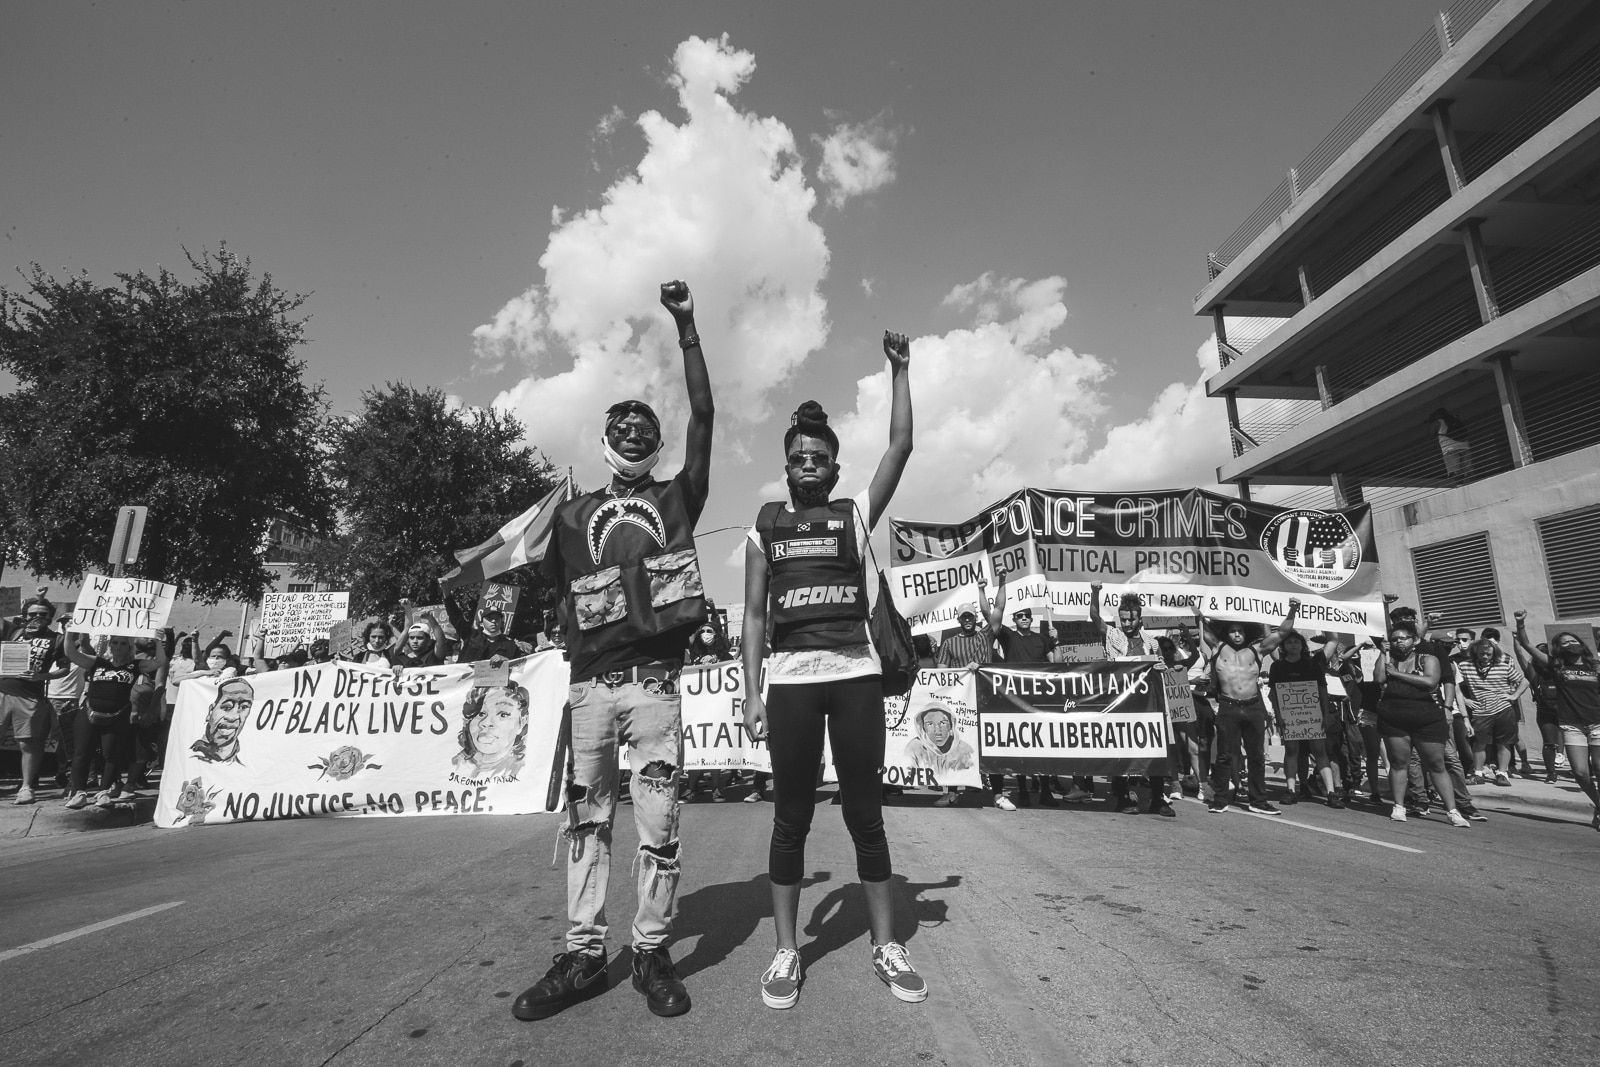 The George Floyd Protest against police brutality in Dallas